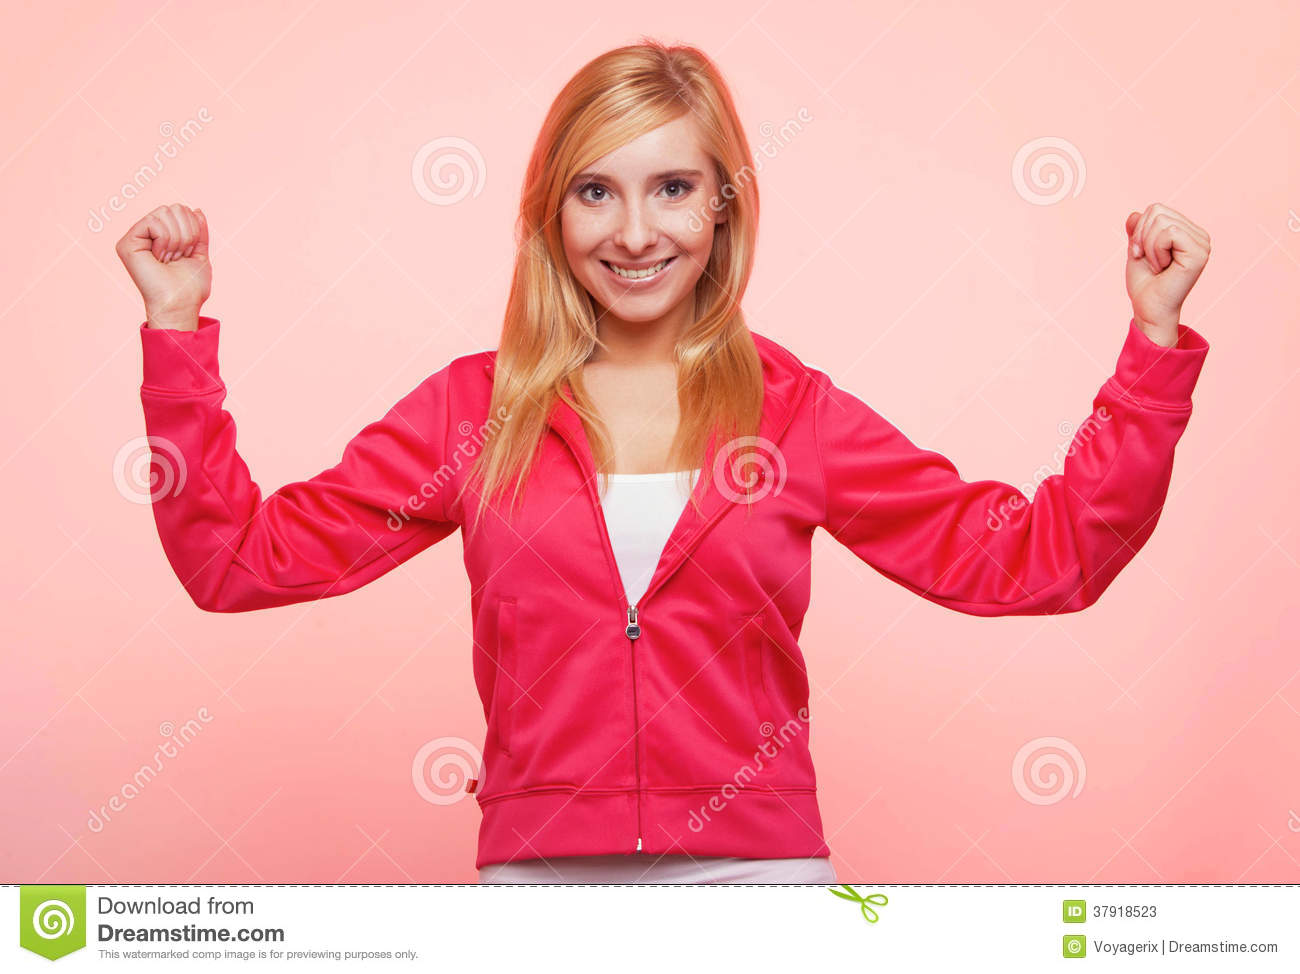 Fitness Woman Showing Fresh Energy Flexing Biceps Muscles Smiling